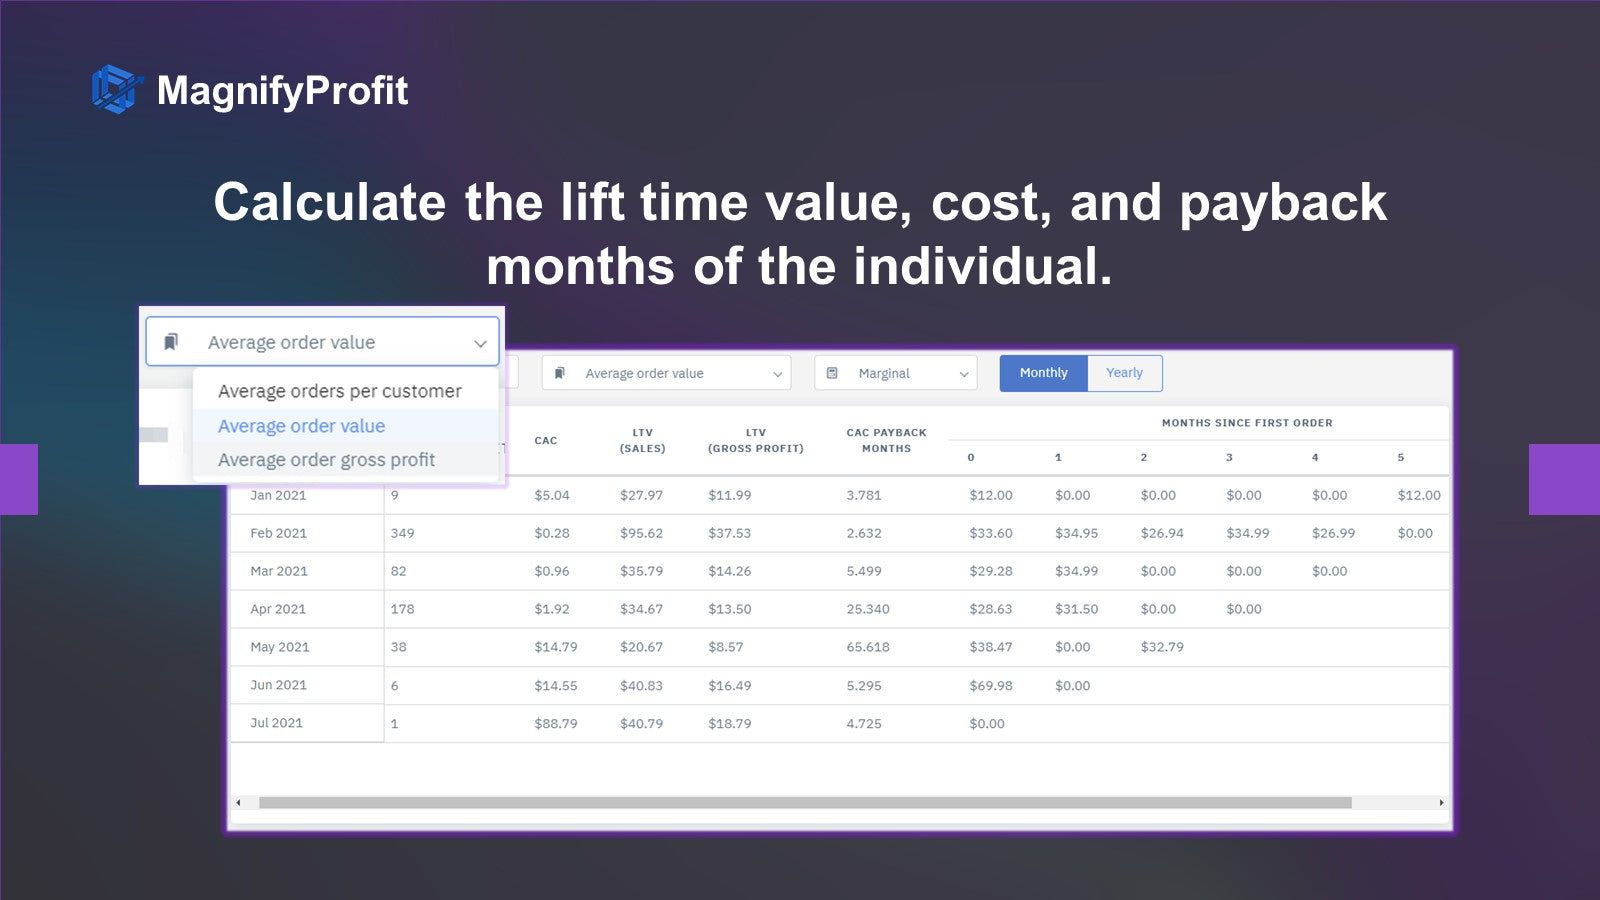 Calculate the lifetime value, cost, and payback months